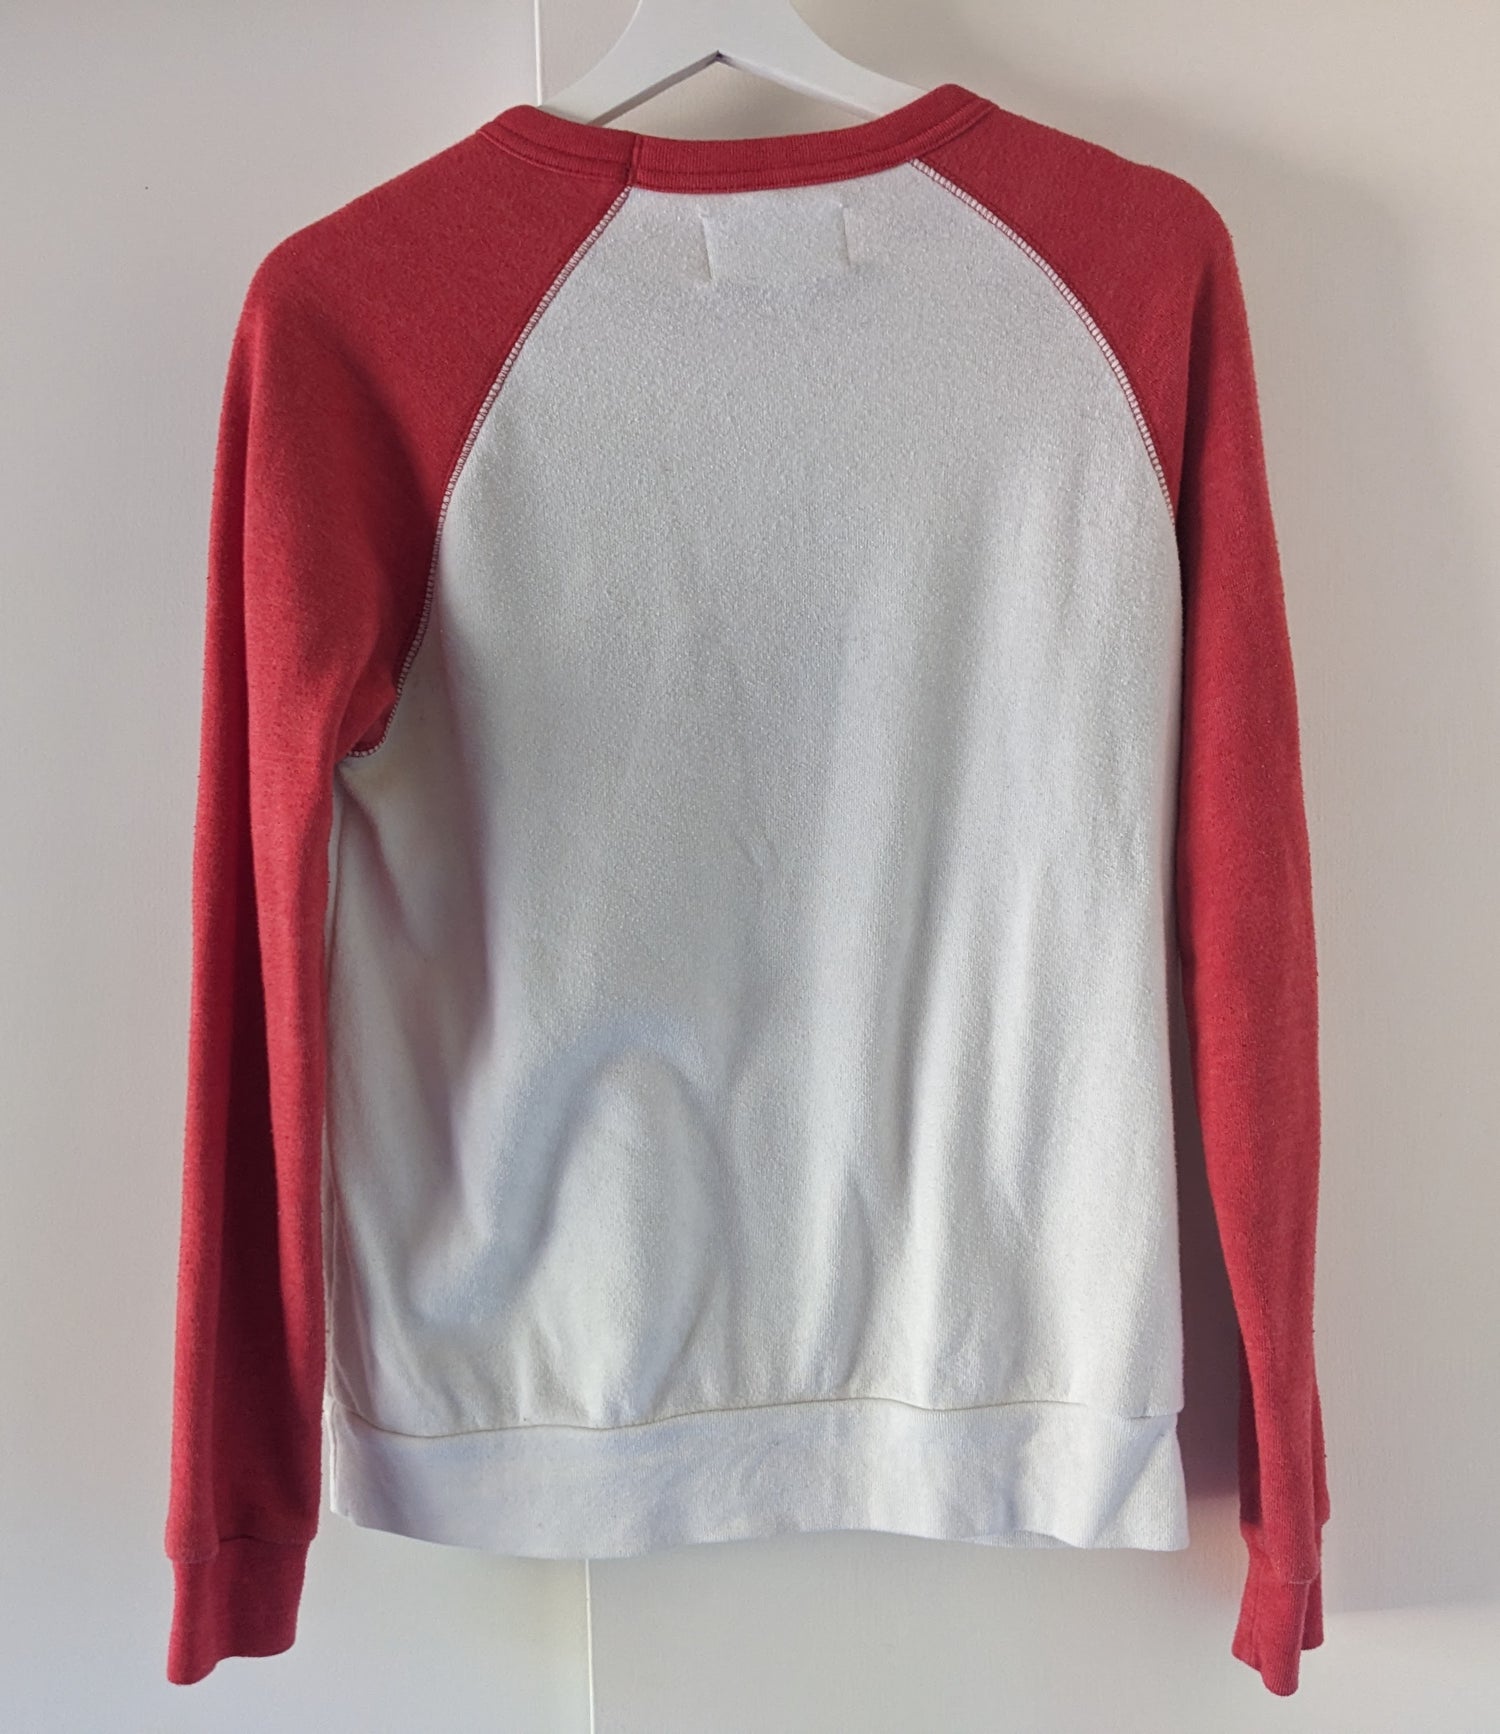 White and Red Parks Project Super Natural Bison fleece long sleeve shirt back